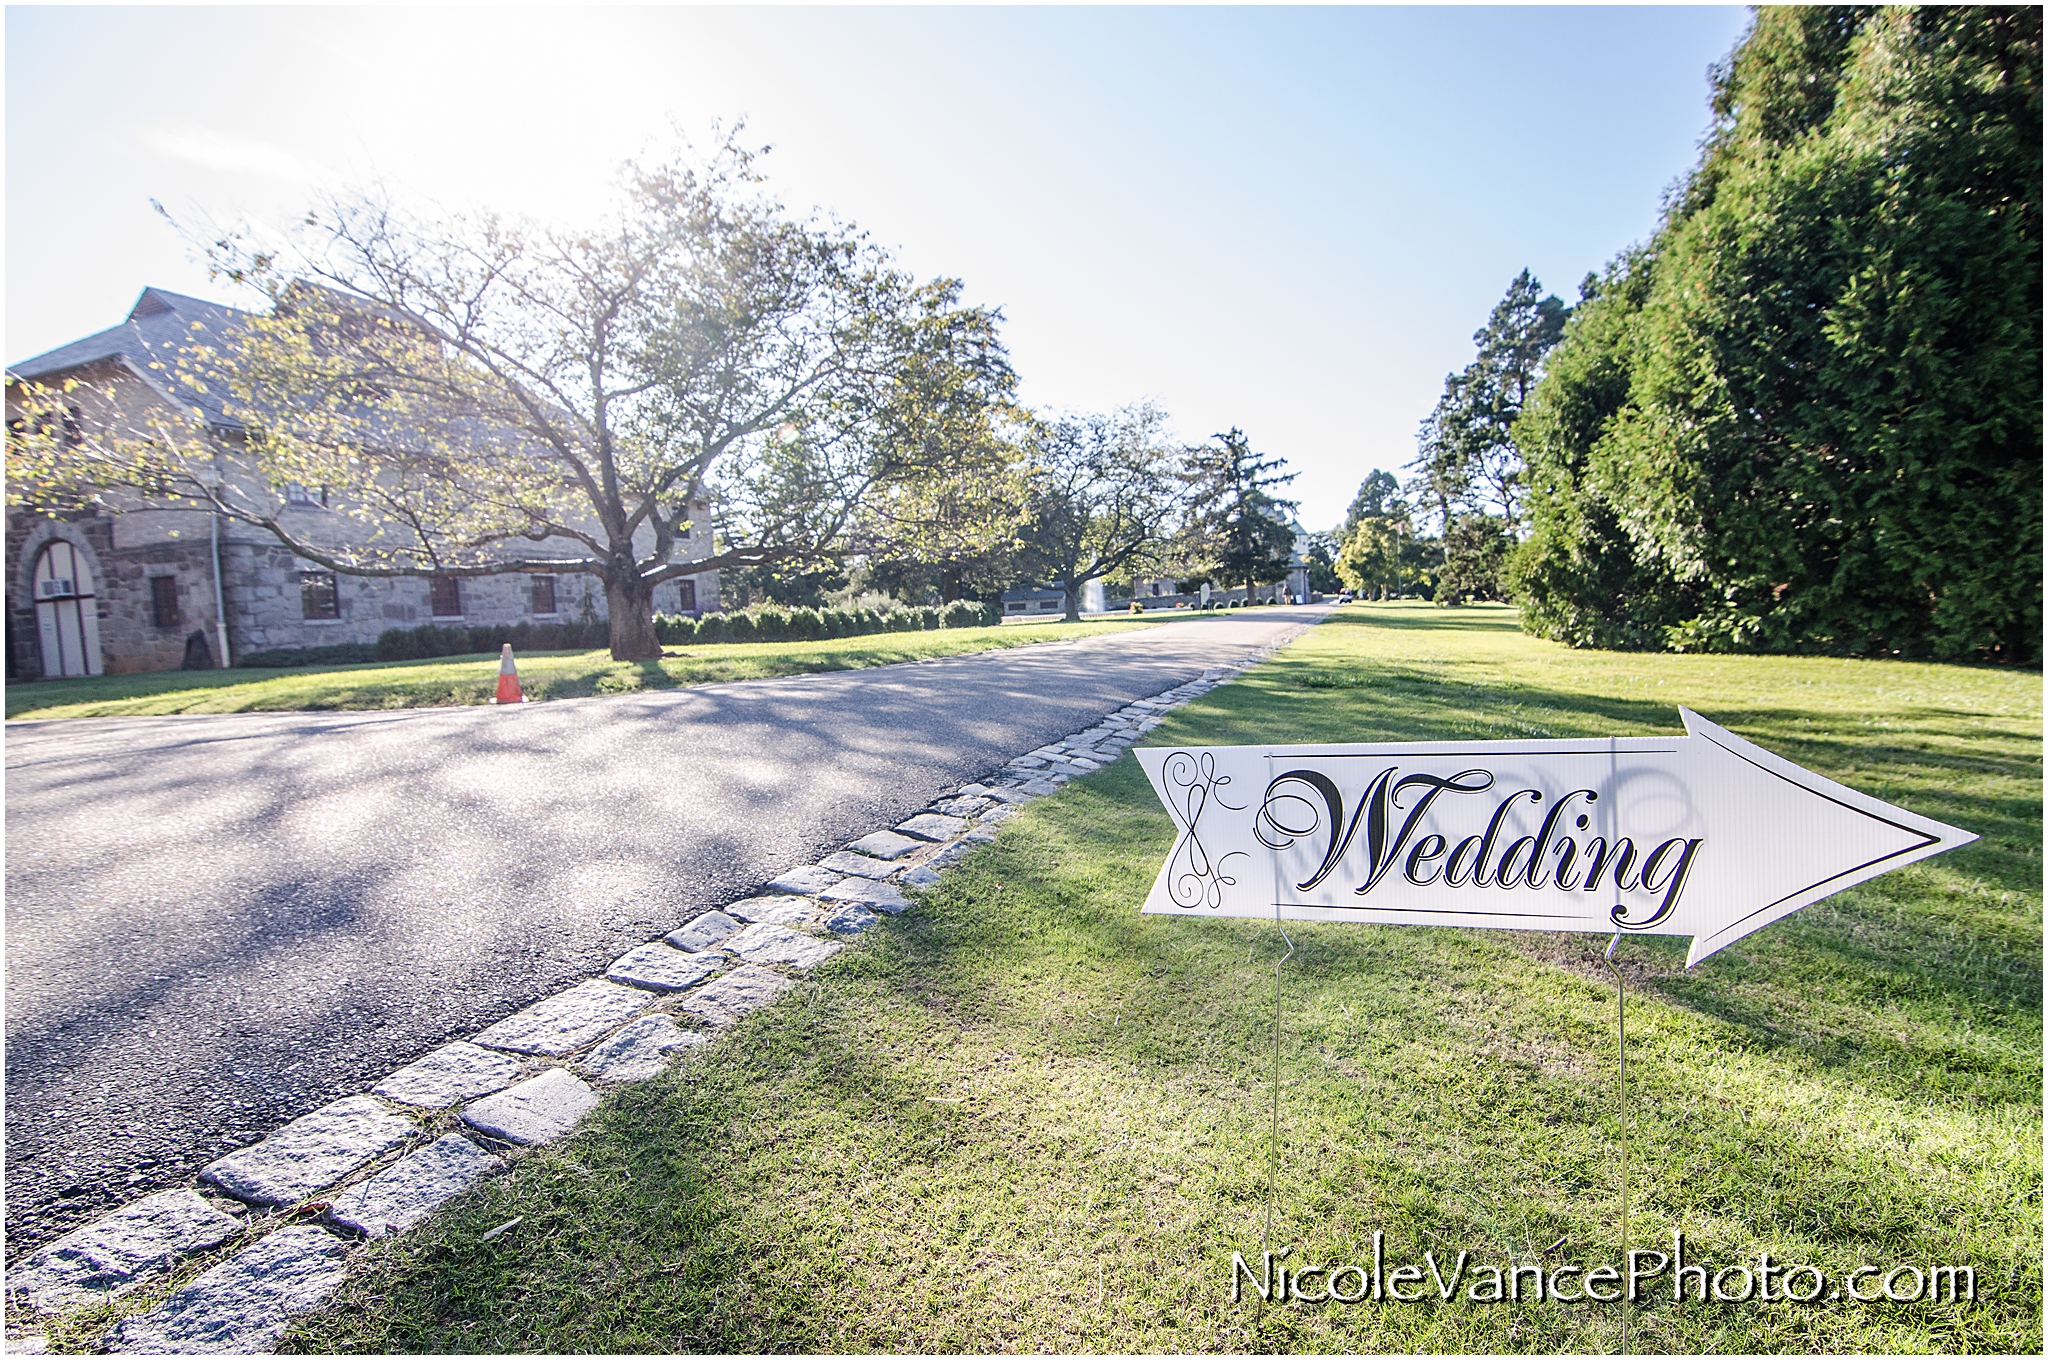 This wedding sign guides the guest to the wedding location to the large Tulip Polar Tree at Maymont Park in Richmond Virginia.